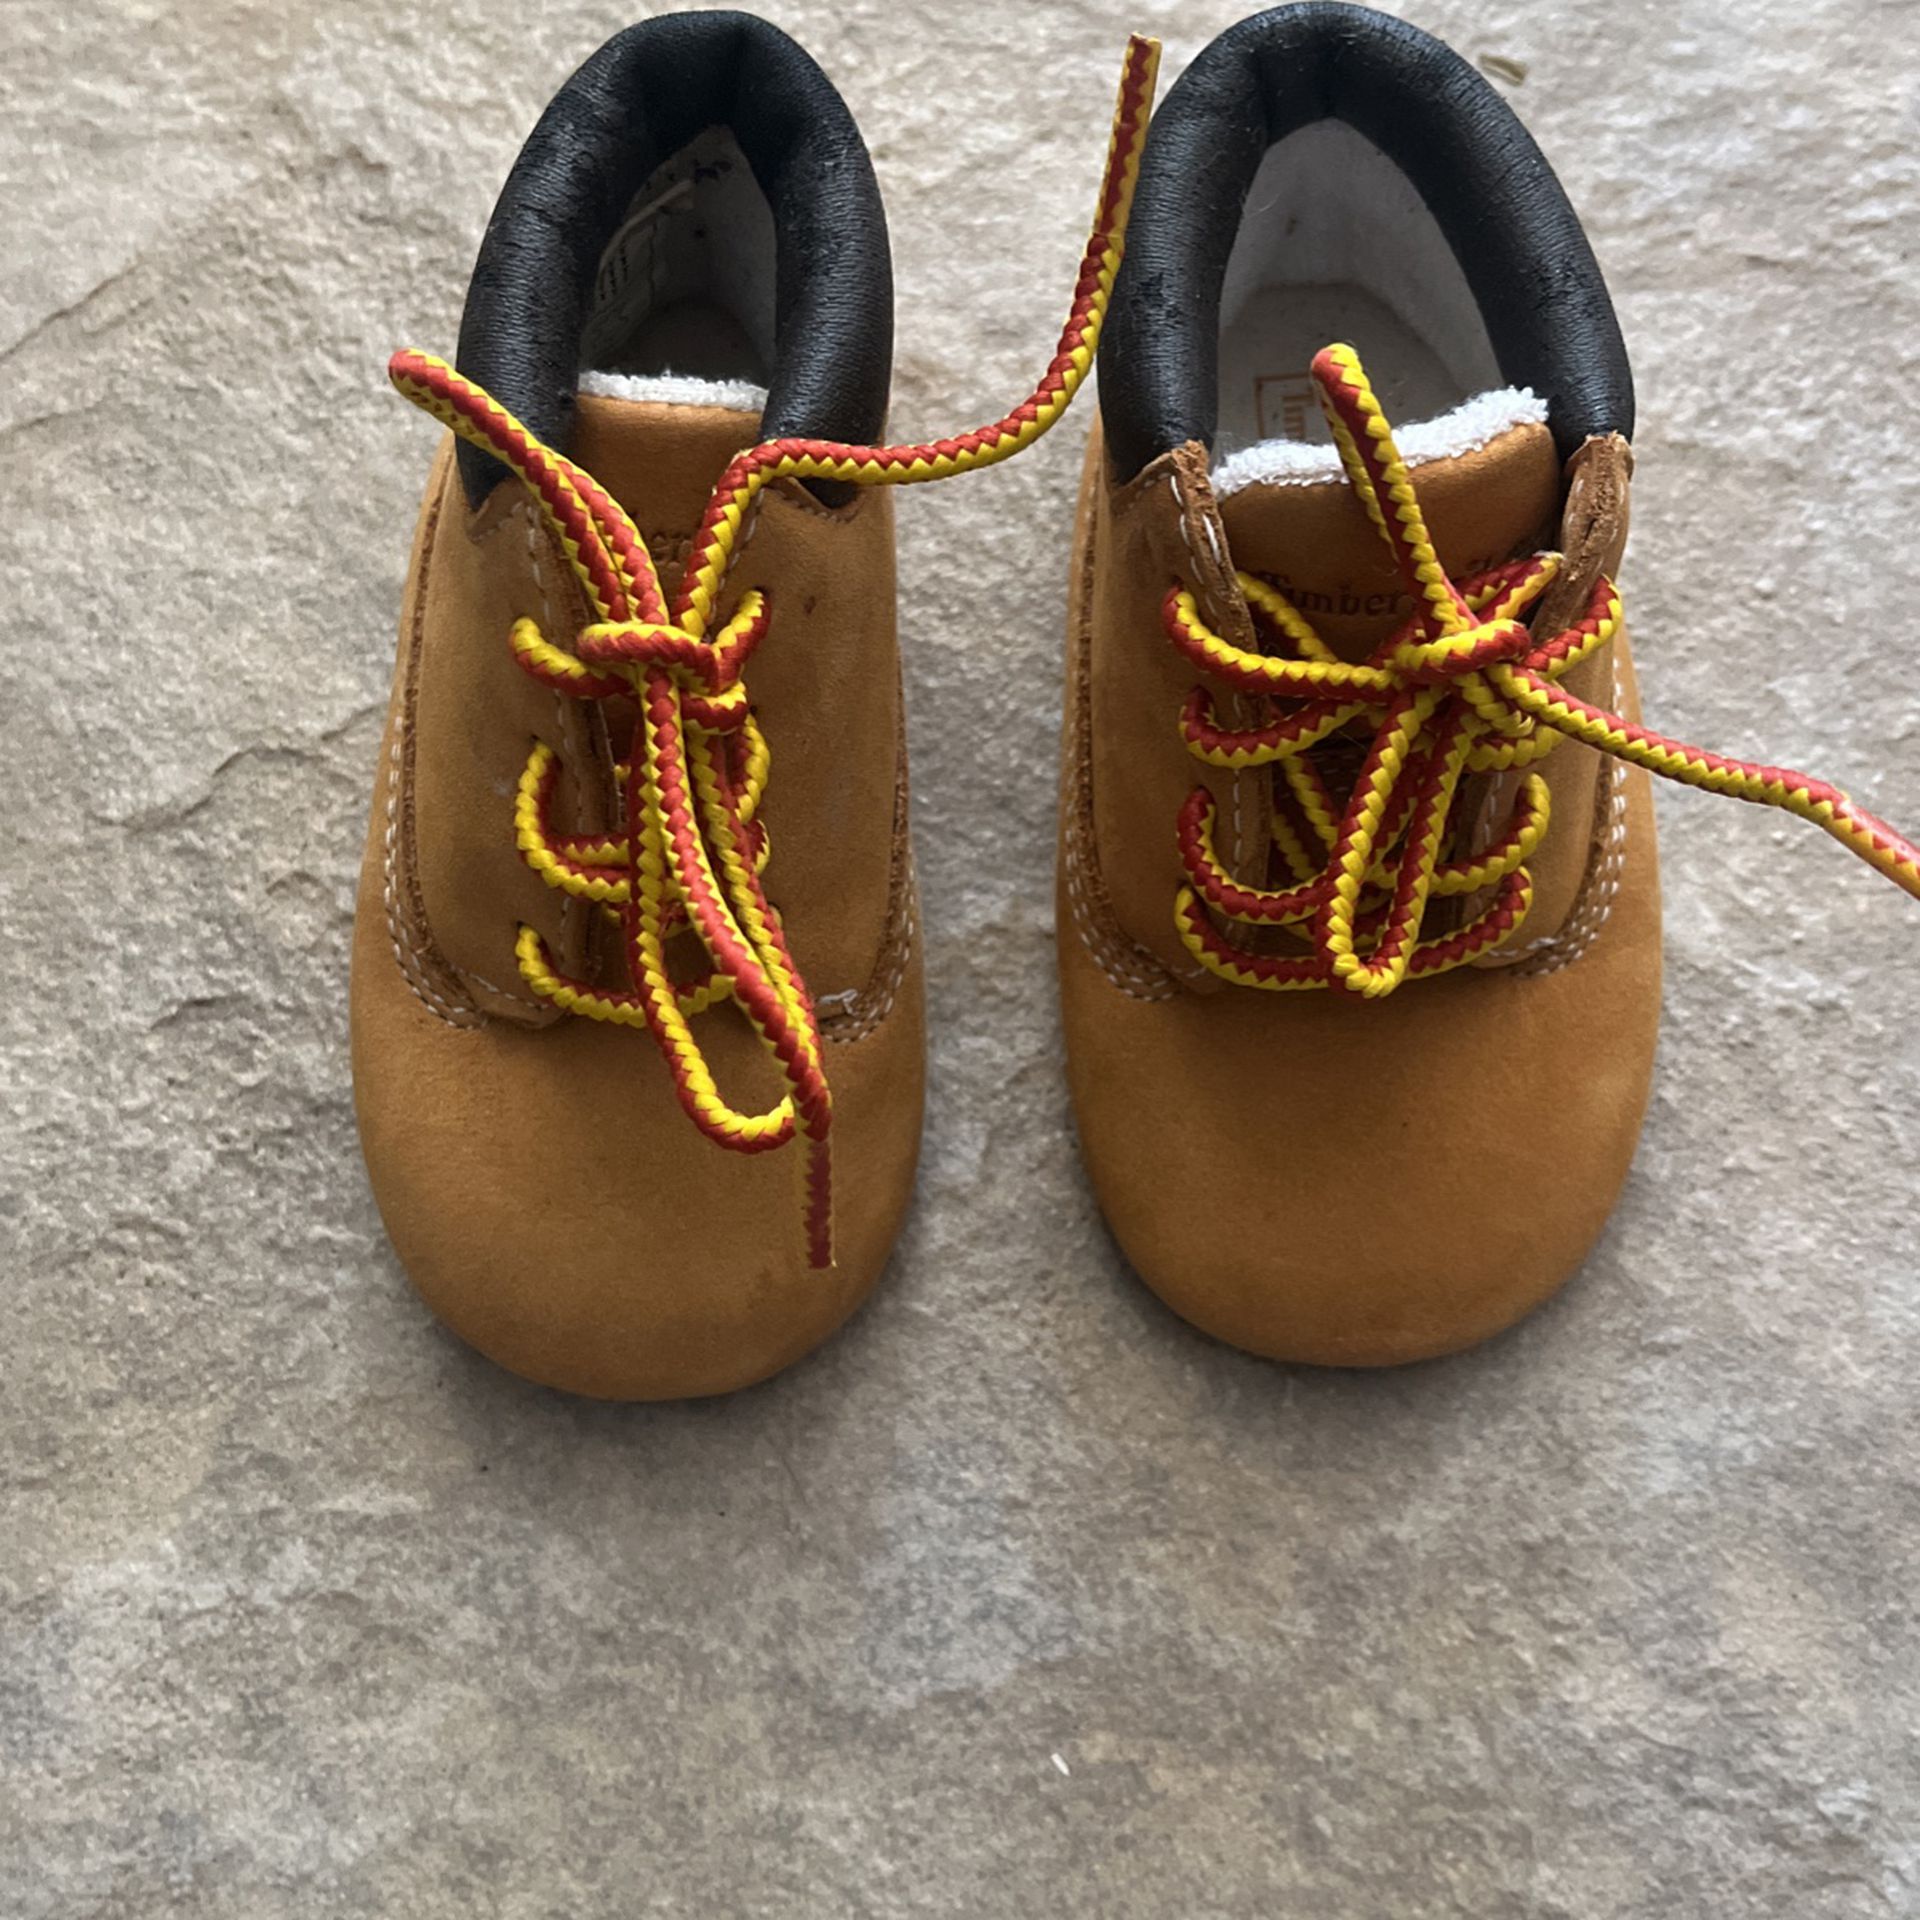 Infant Timberlands Boots